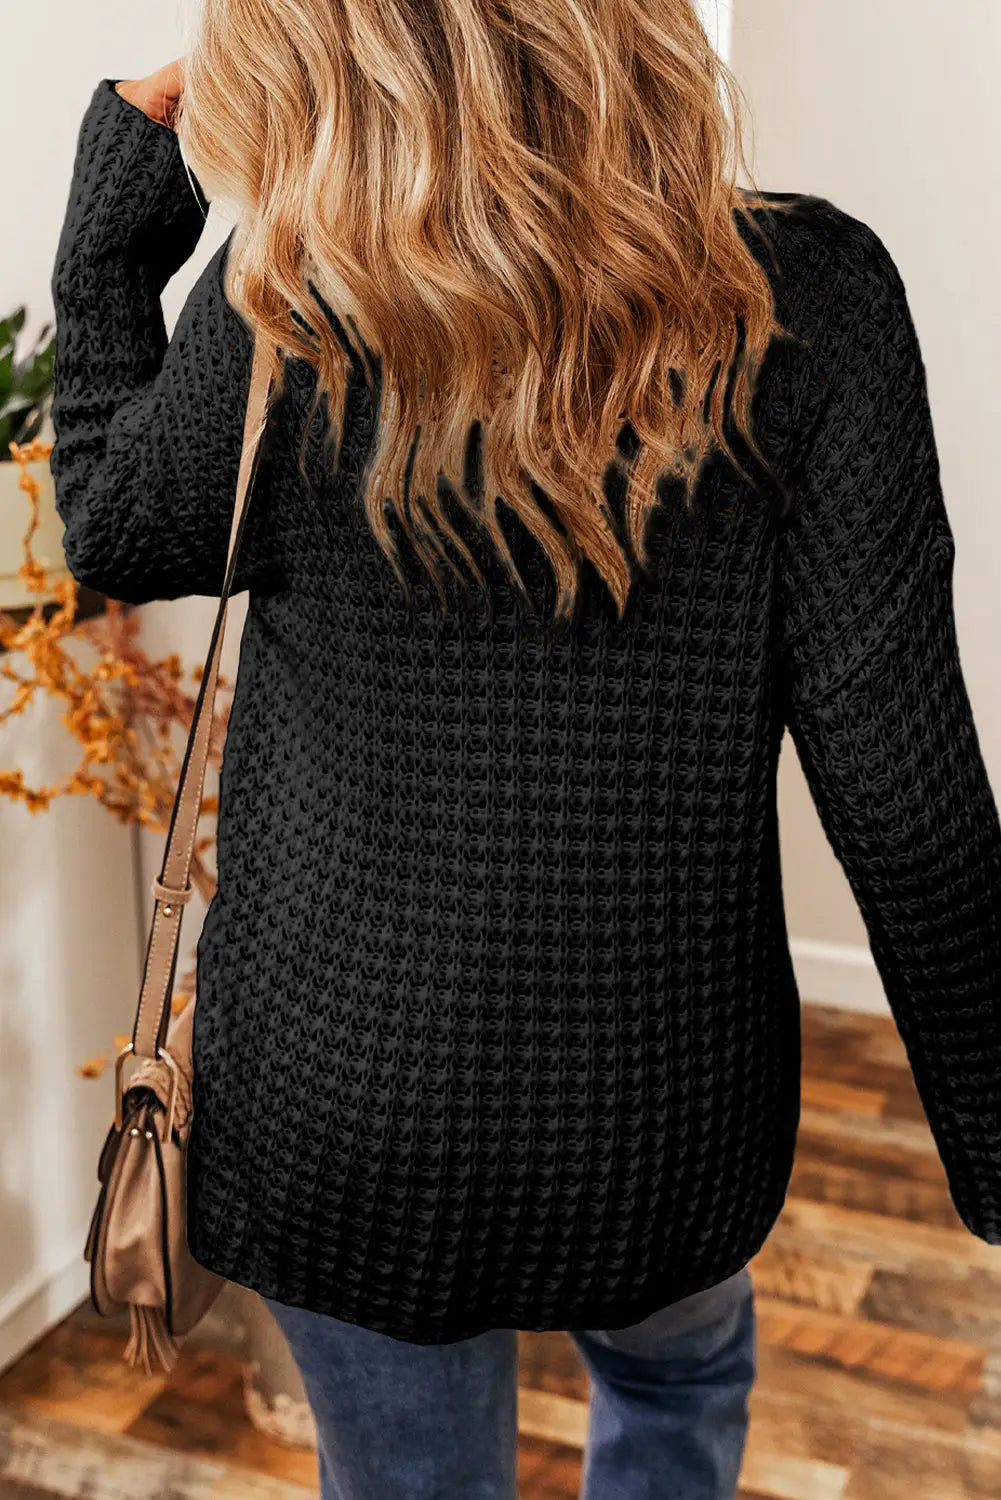 Black hollow-out crochet v neck sweater - tops